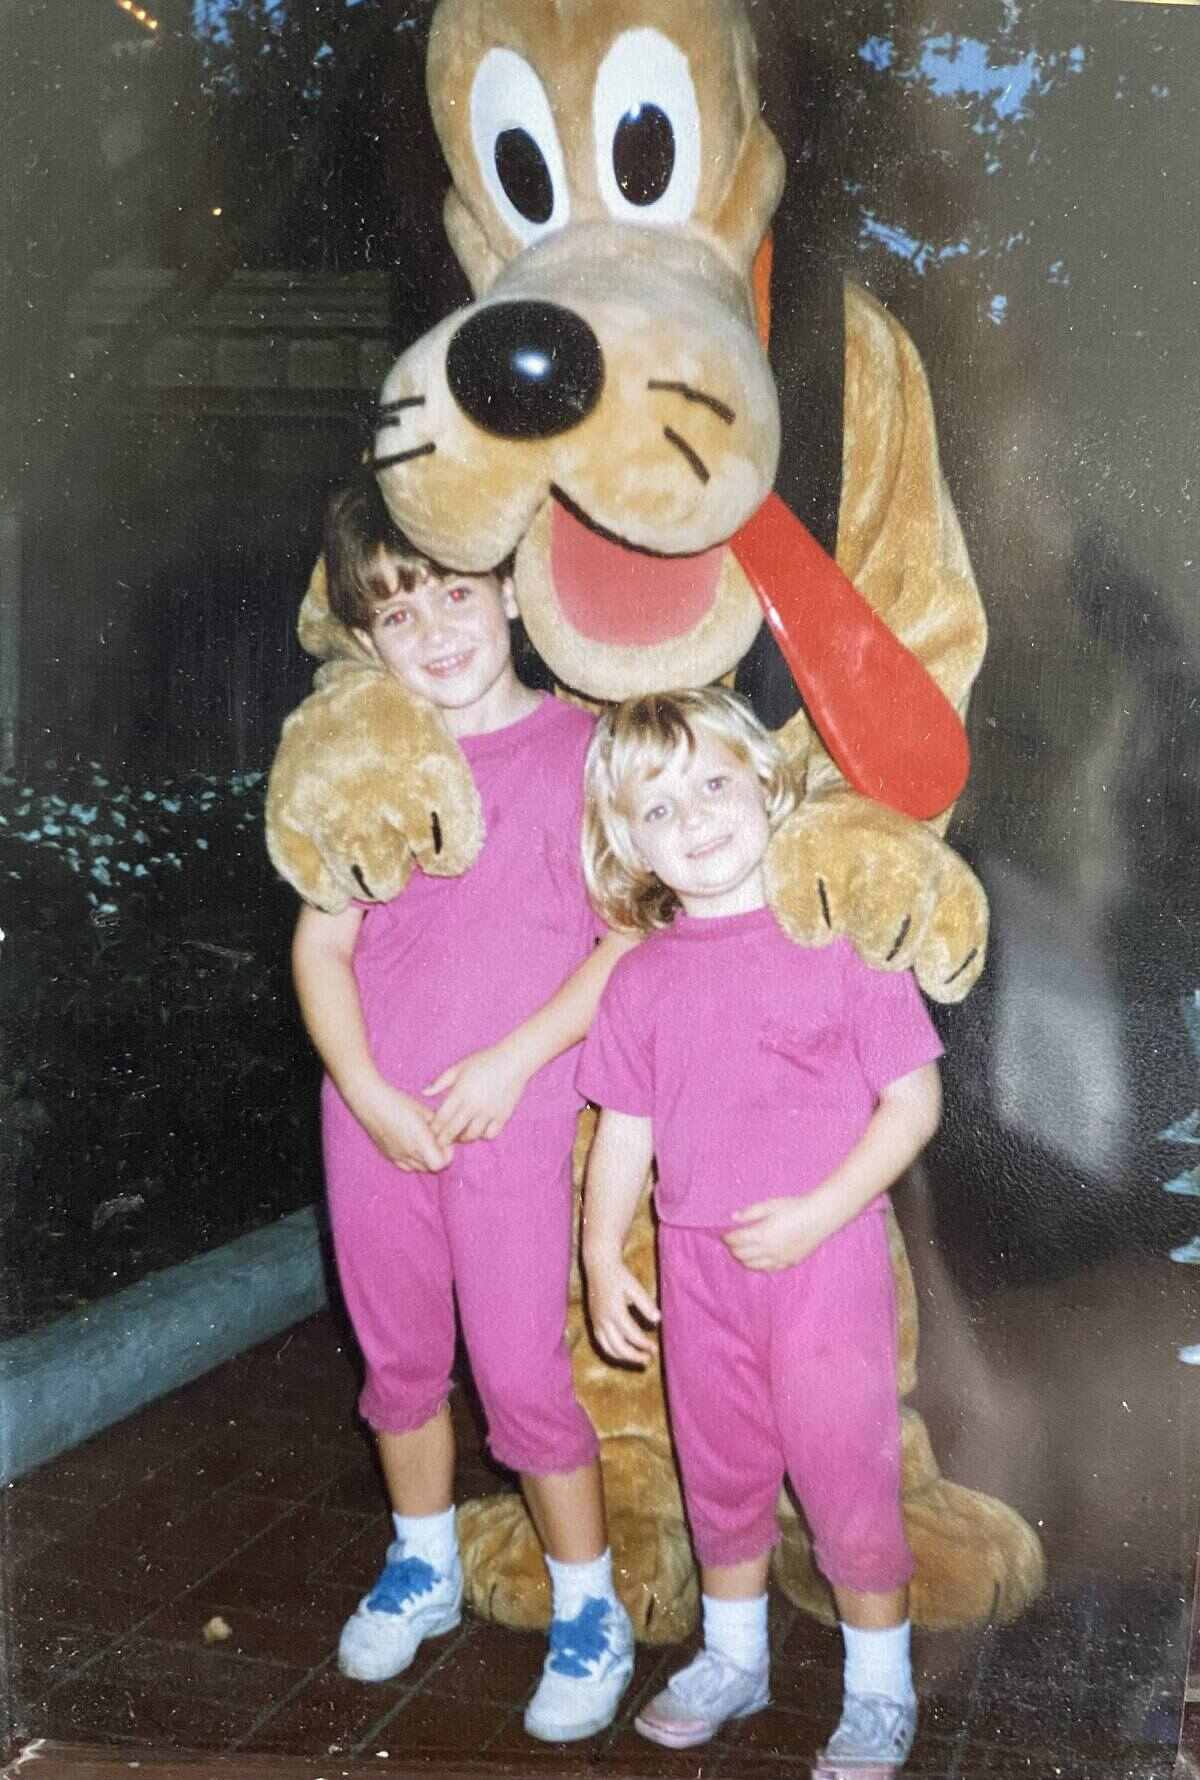 An old photo of two young girls posing with Goofy. 